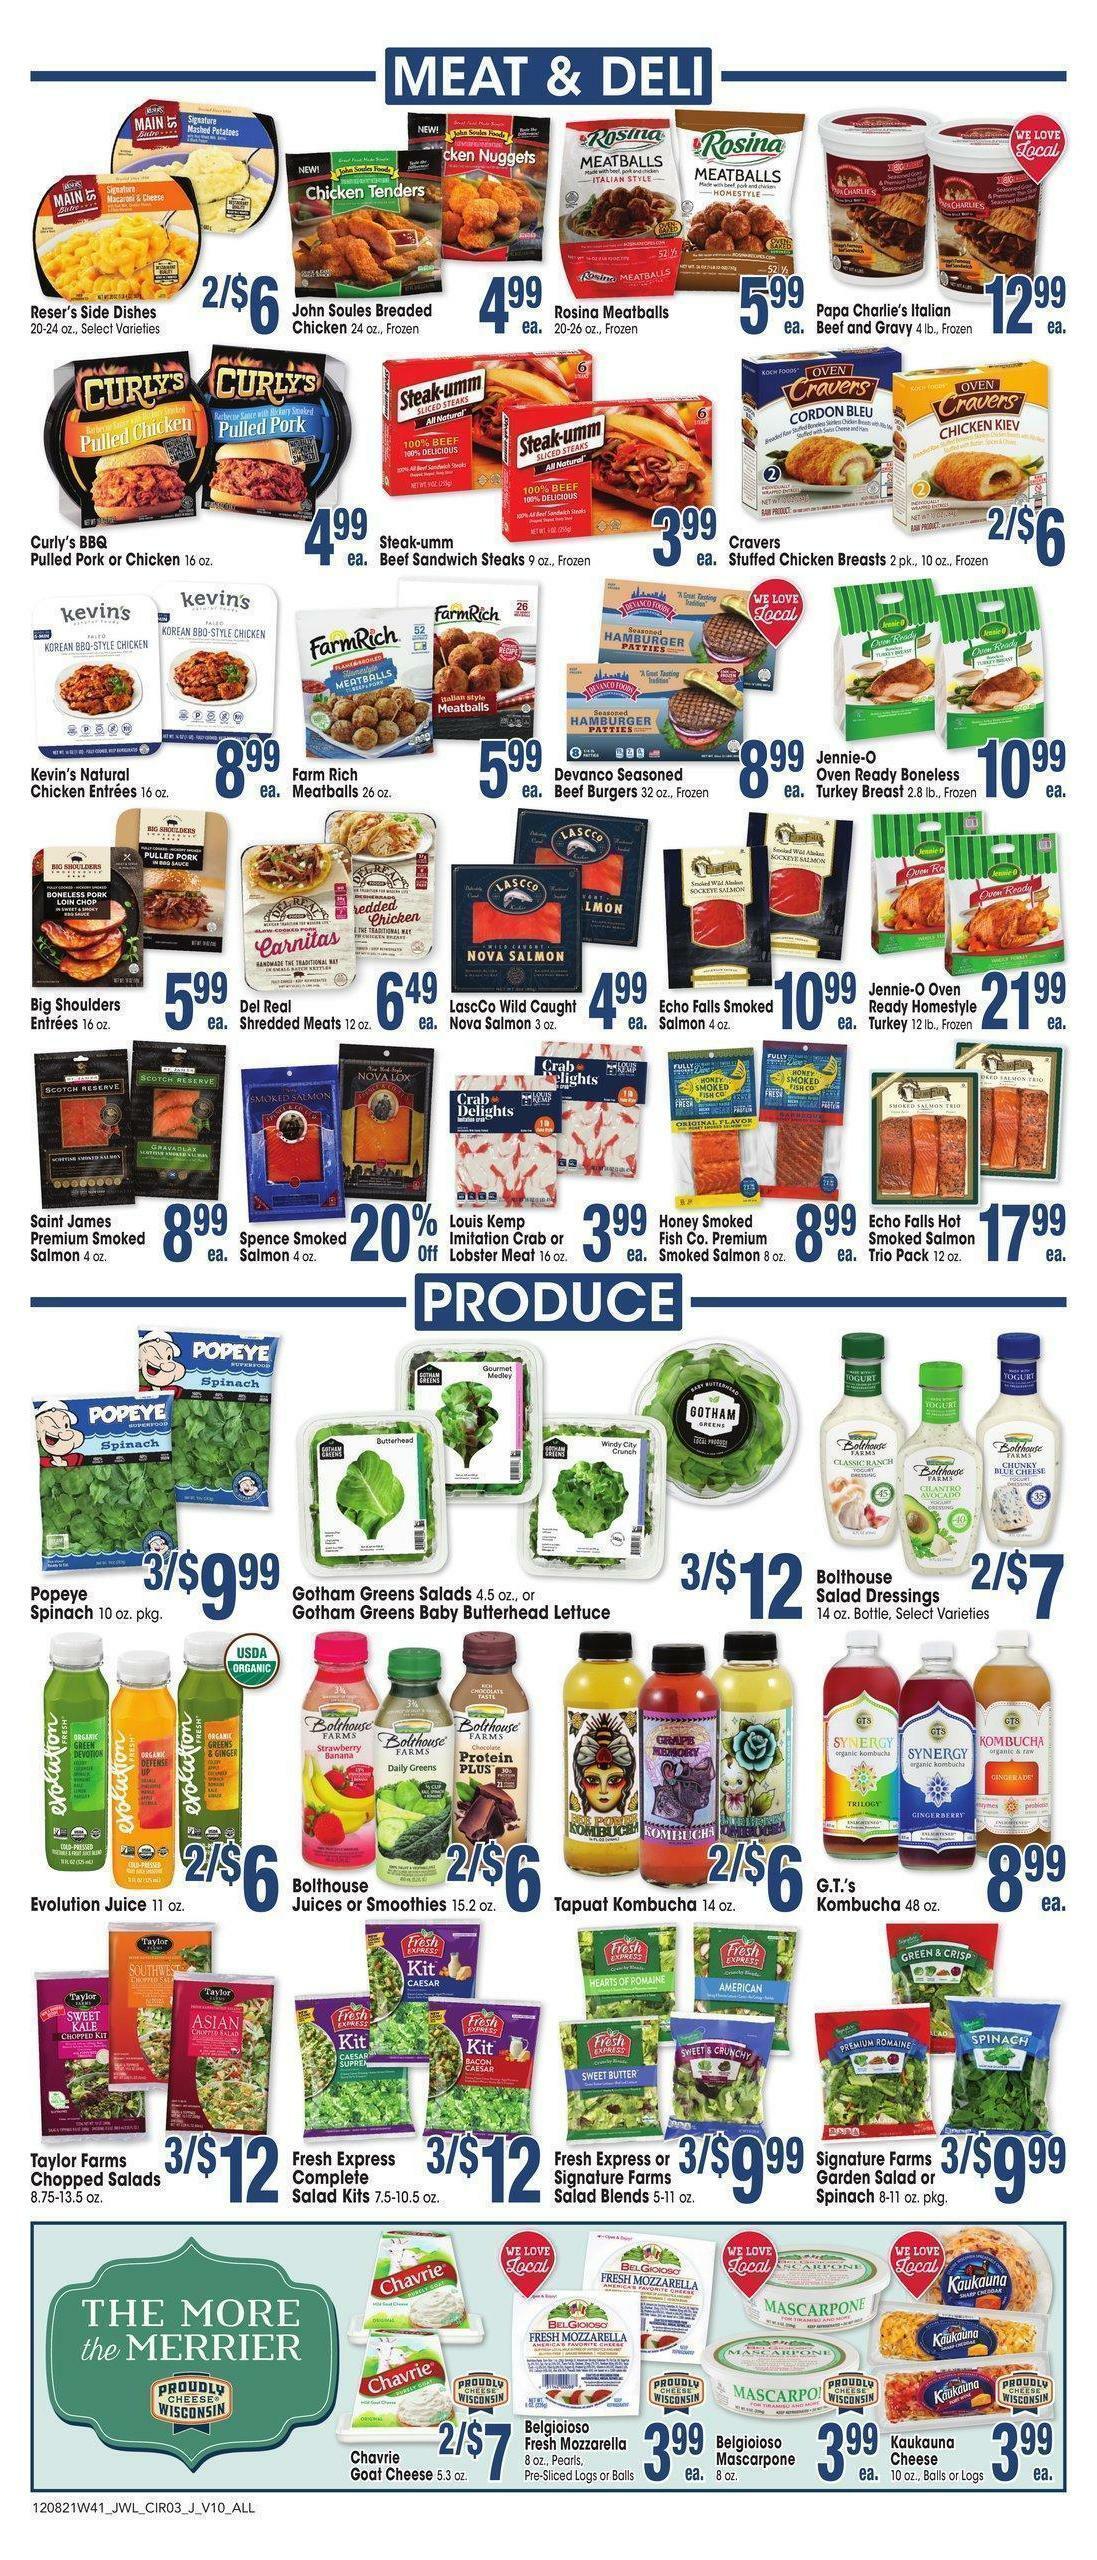 Jewel Osco Weekly Ad from December 8